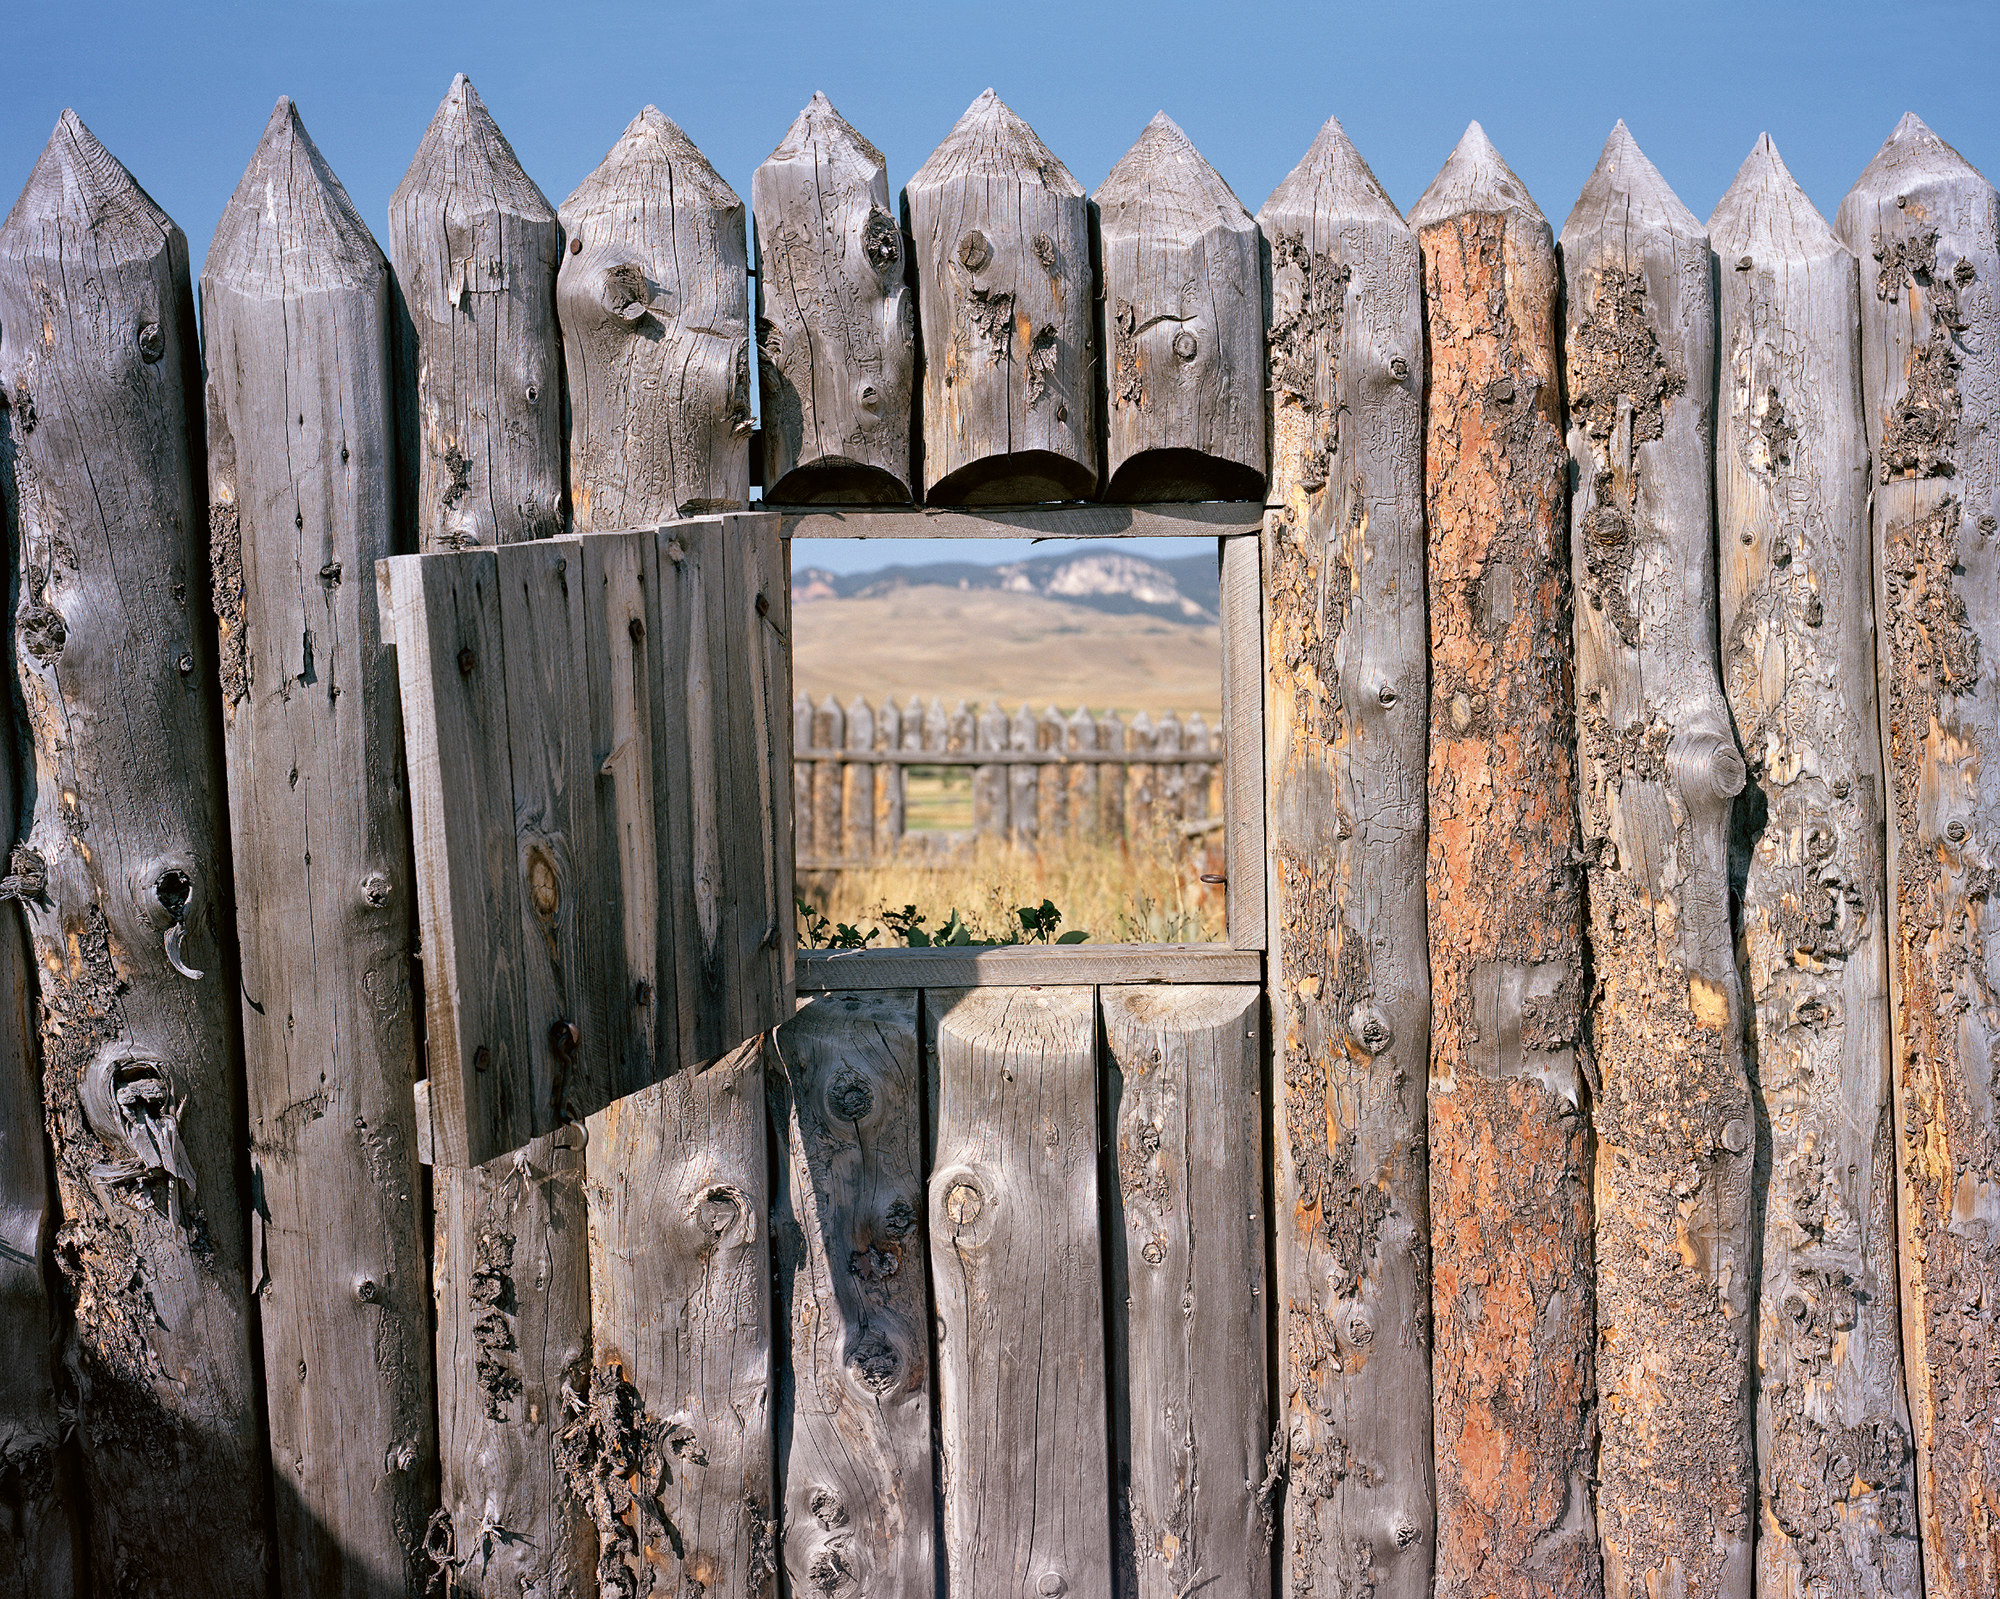 A landscape seen through a cutout in a wooden post fence